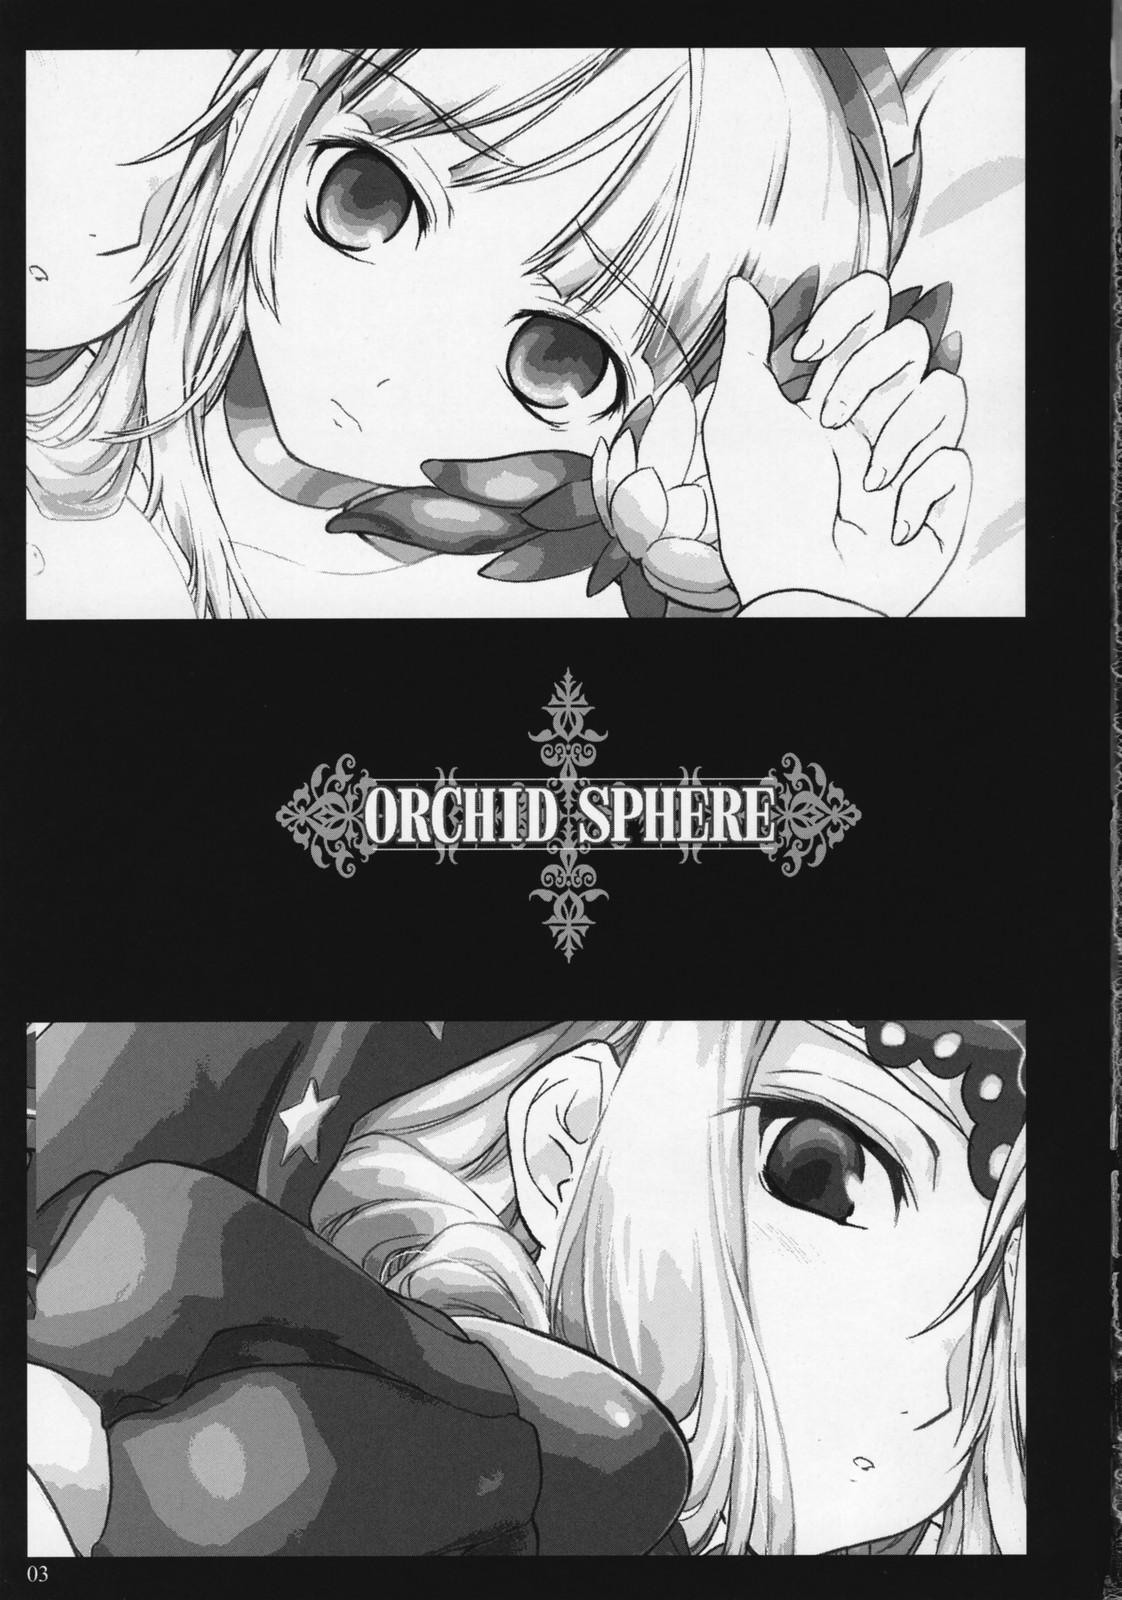 Sola Orchid Sphere - Odin sphere Missionary Position Porn - Page 2